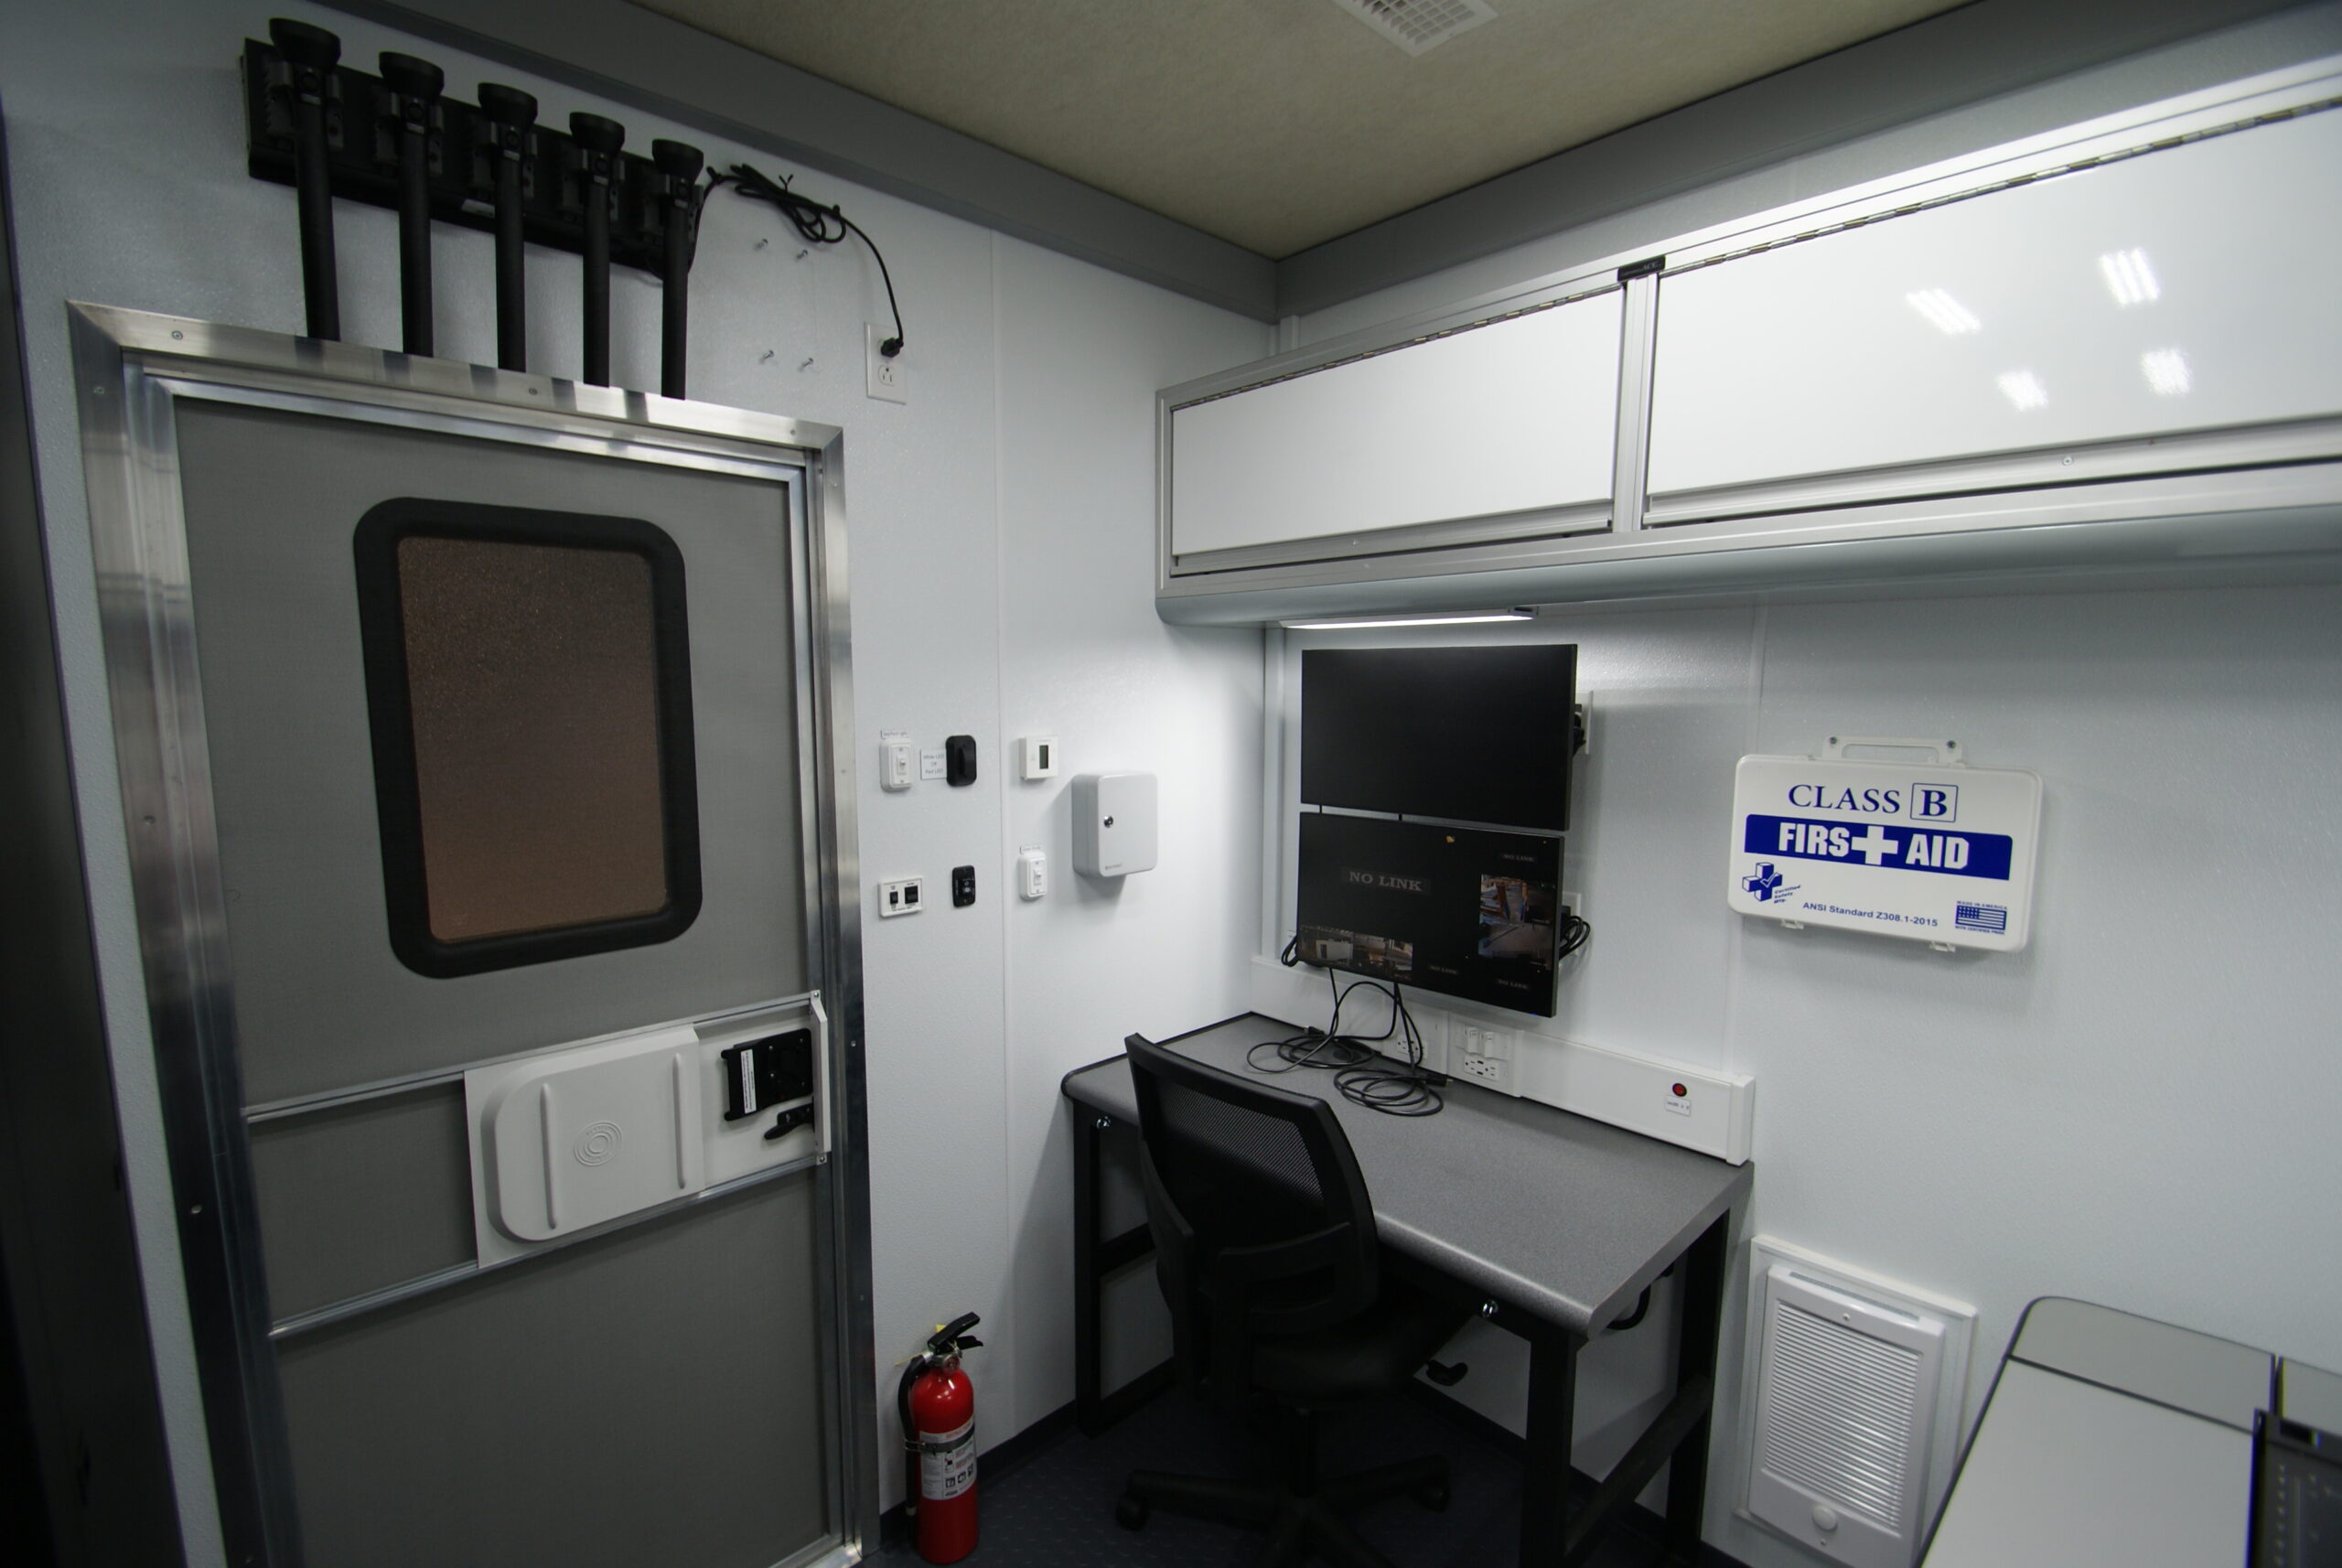 A view of a workstation, first aid kit, and overhead cabinets inside the unit for Westmoreland County Public Safety.